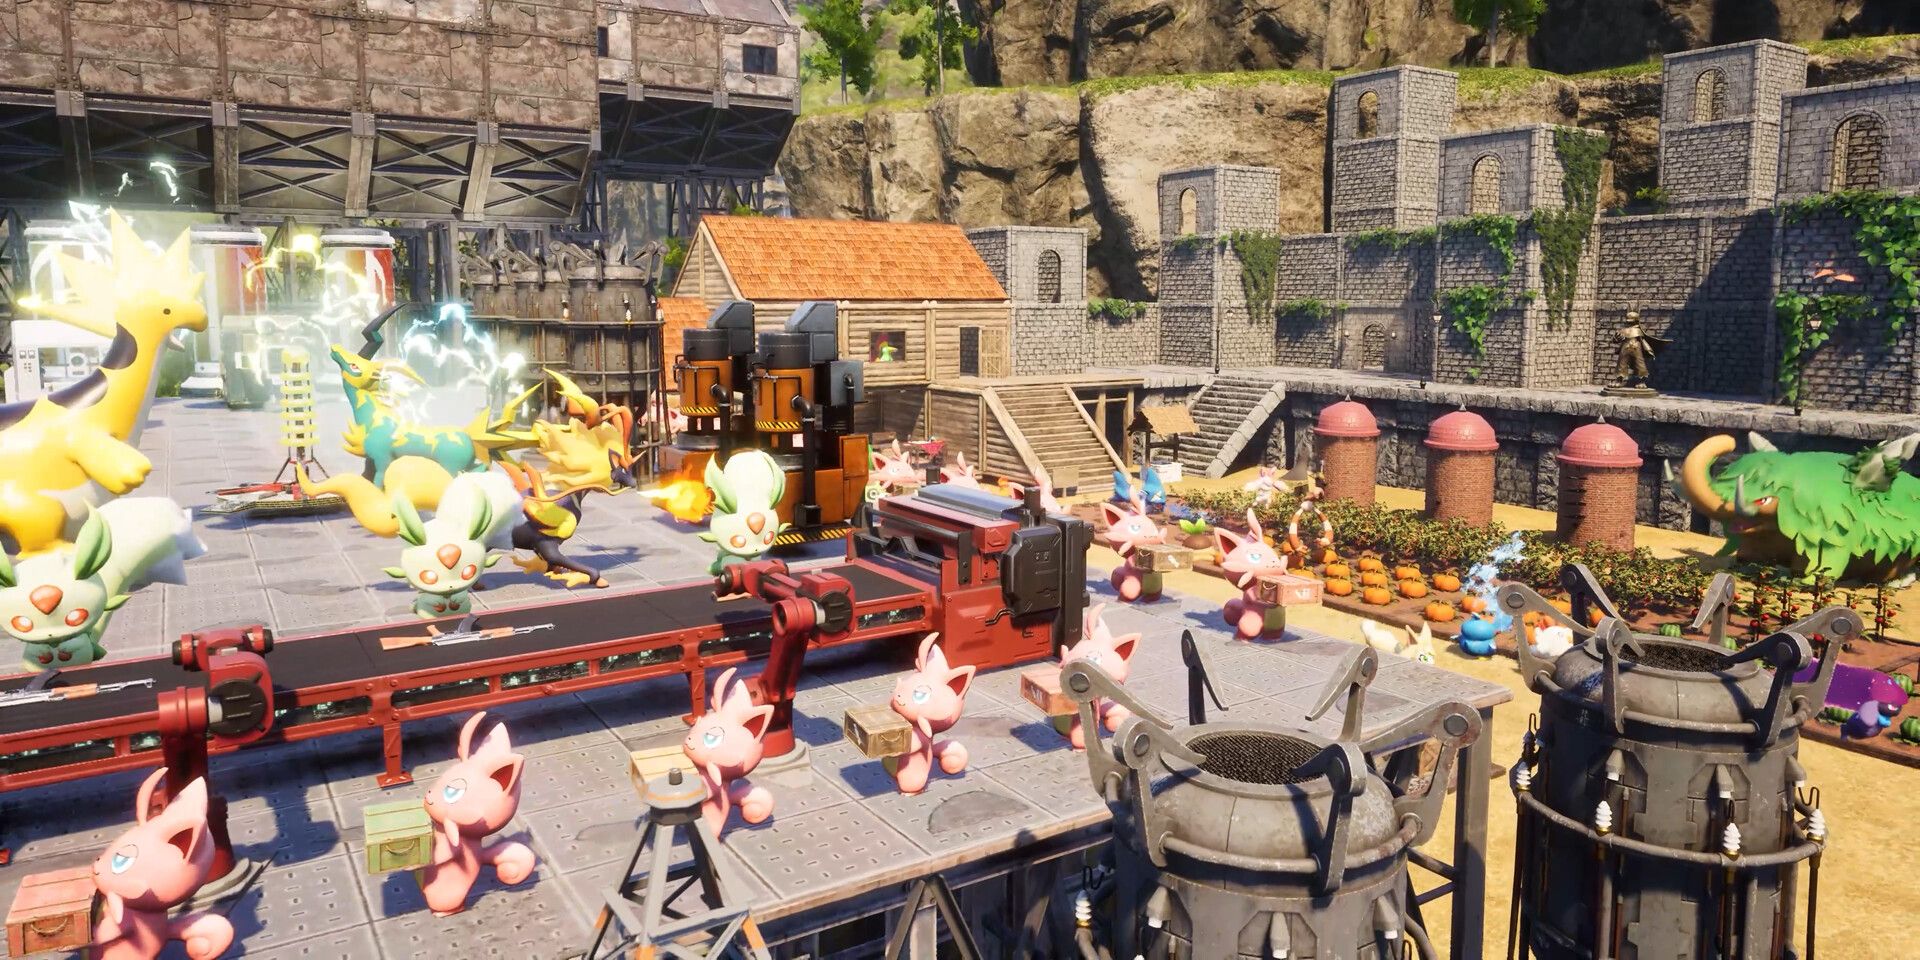 An image of a highly efficient base in Palworld. Cattivas carry crates, Pengullets water a pumpkin patch, while various other Pals heat furnaces, supply power, and assemble rifles.